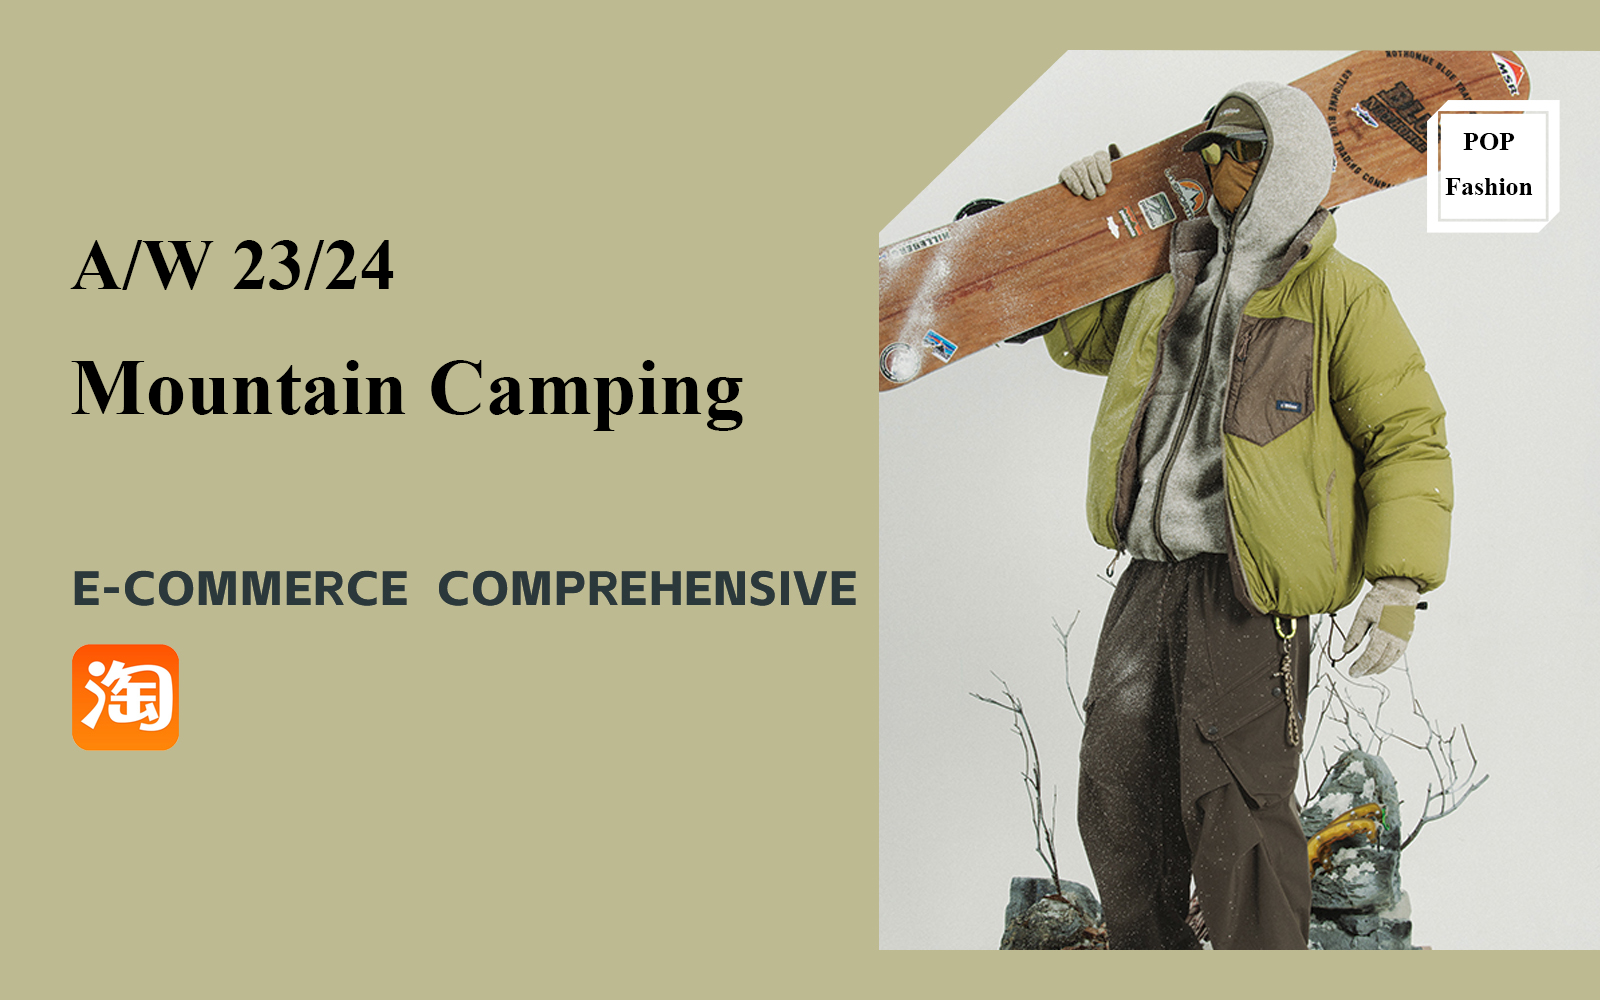 Mountain Camping -- Comprehensive Analysis of Men's Wear E-commerce Brands